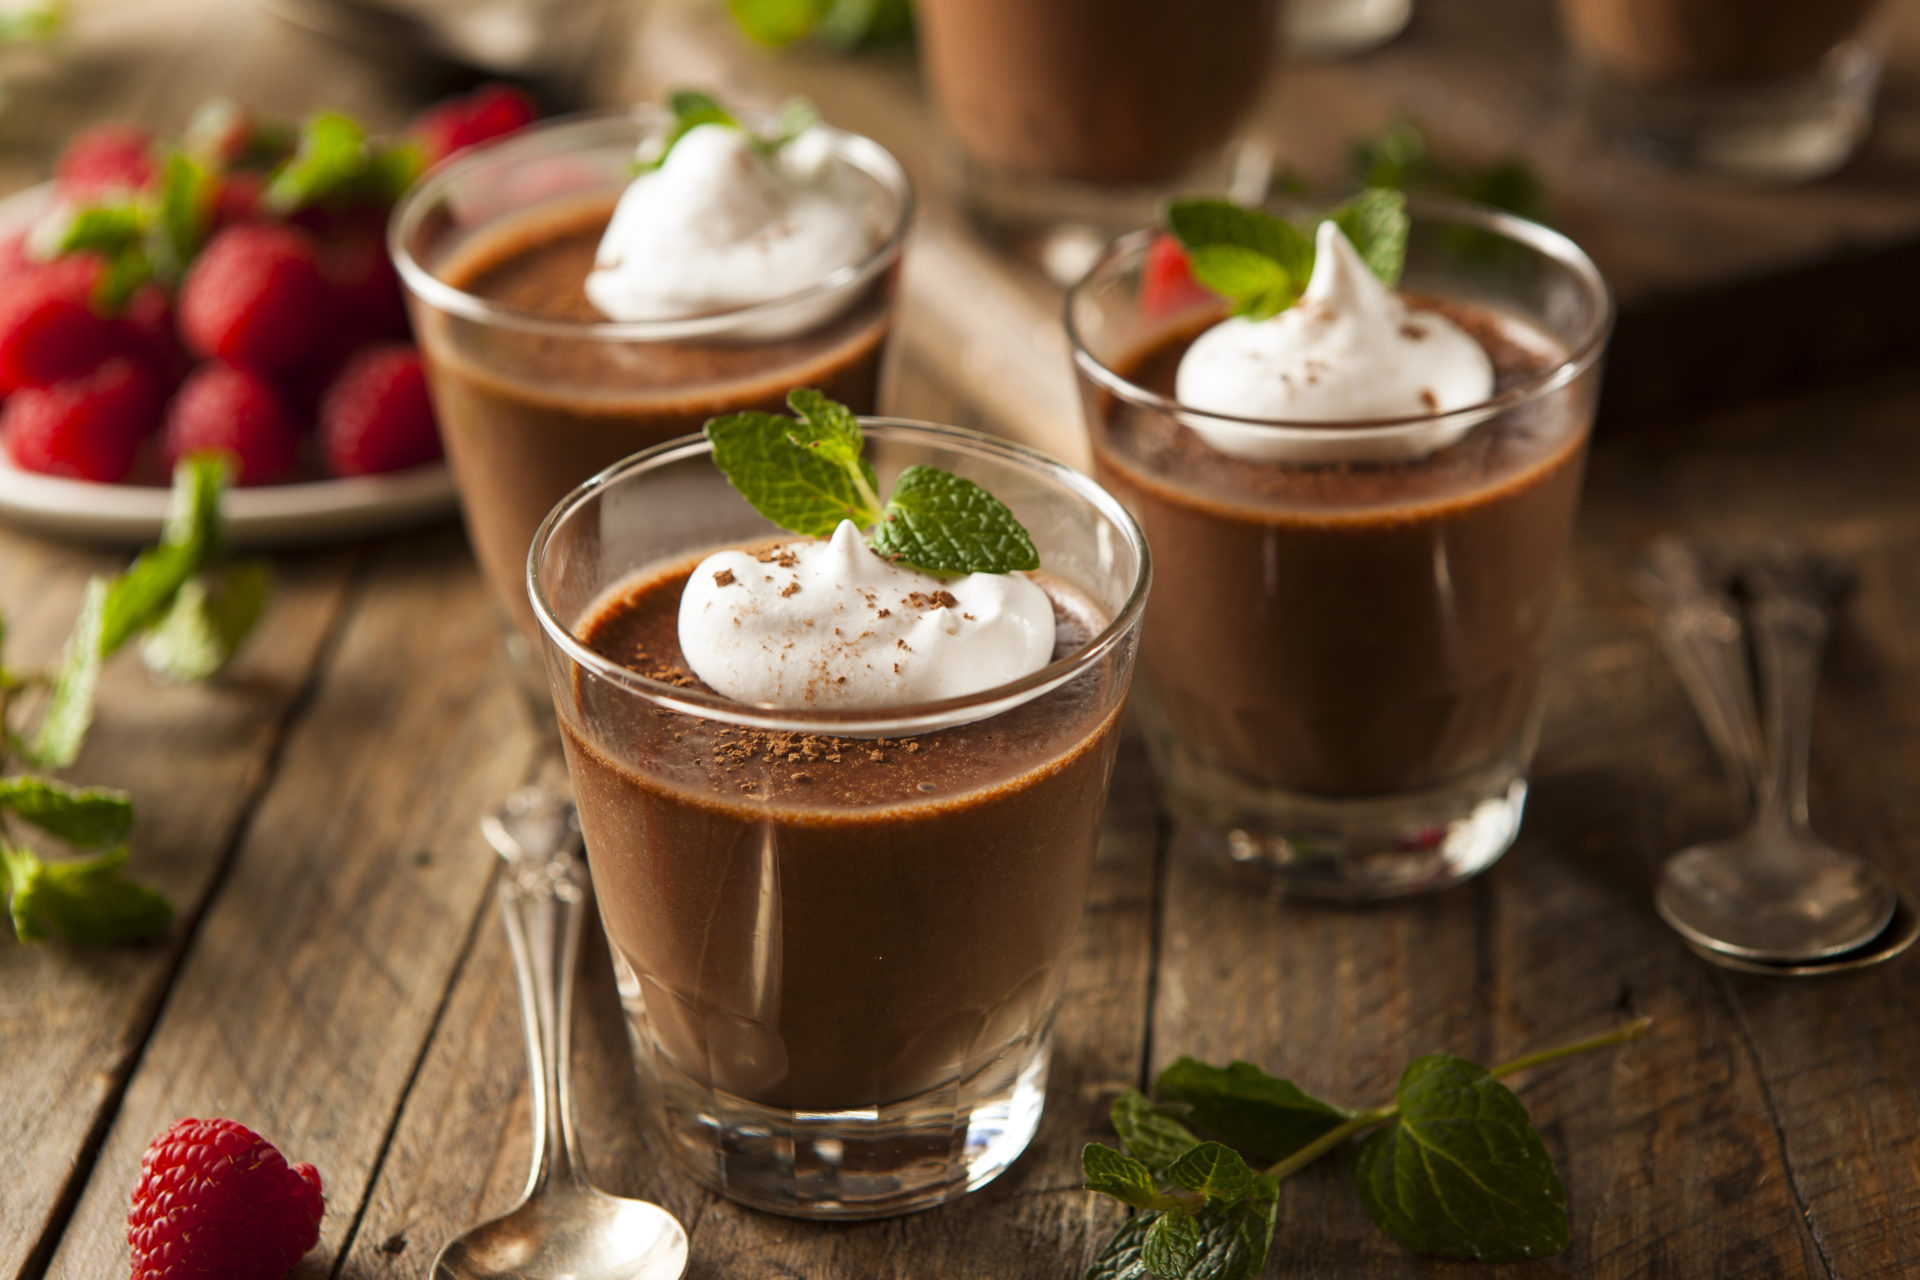 Leftover Chocolate Assortments Mousse